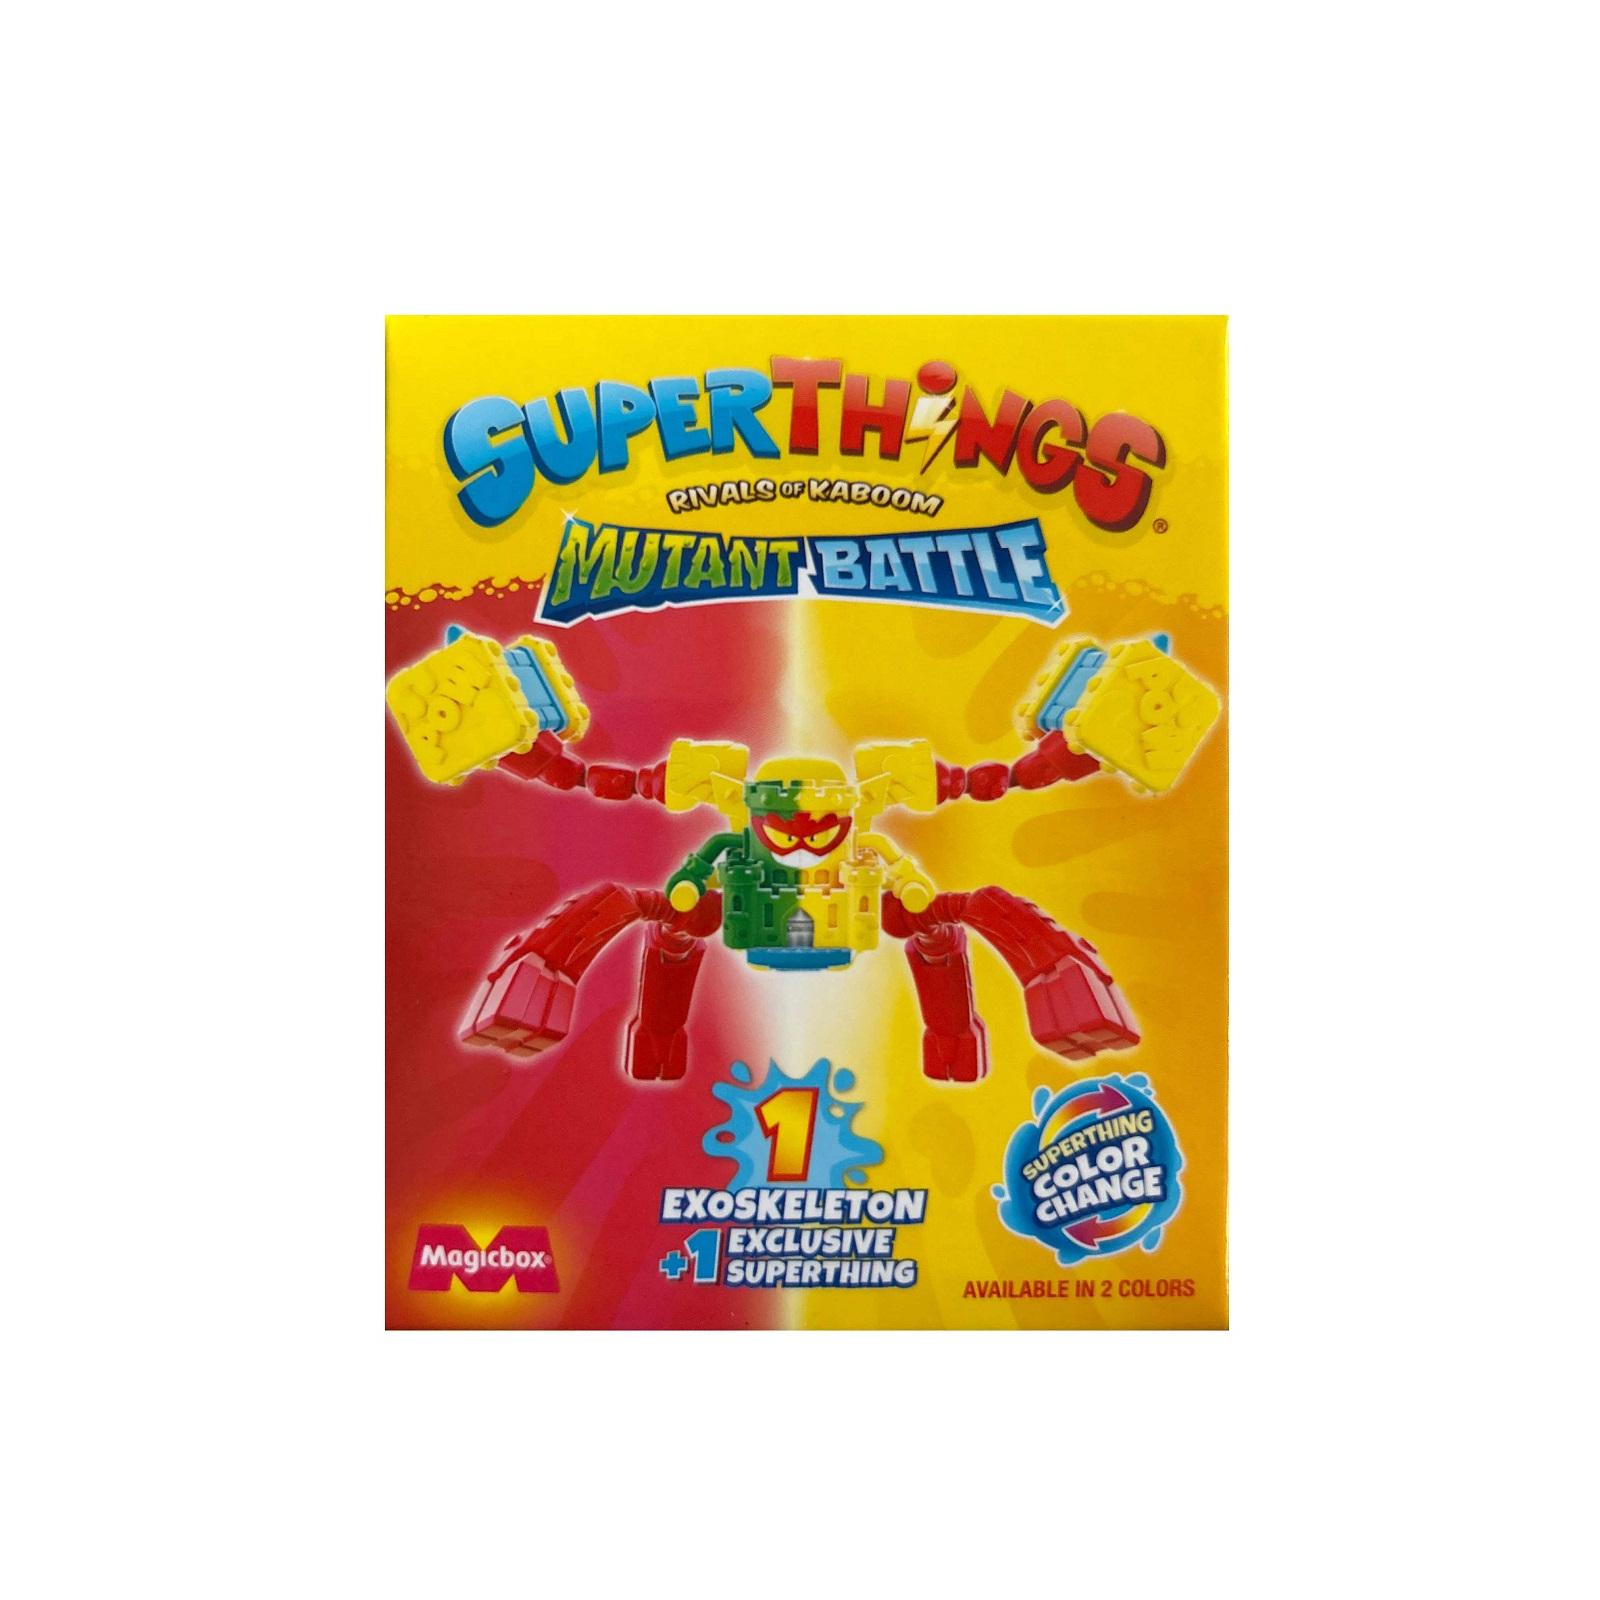 Superthings - Superthings Serie Mutant Battle – Cada Caja Contiene 1 Exoskeleton + 1 SuperThing + 1 Checklist,Compatibles con SuperThings  Kids